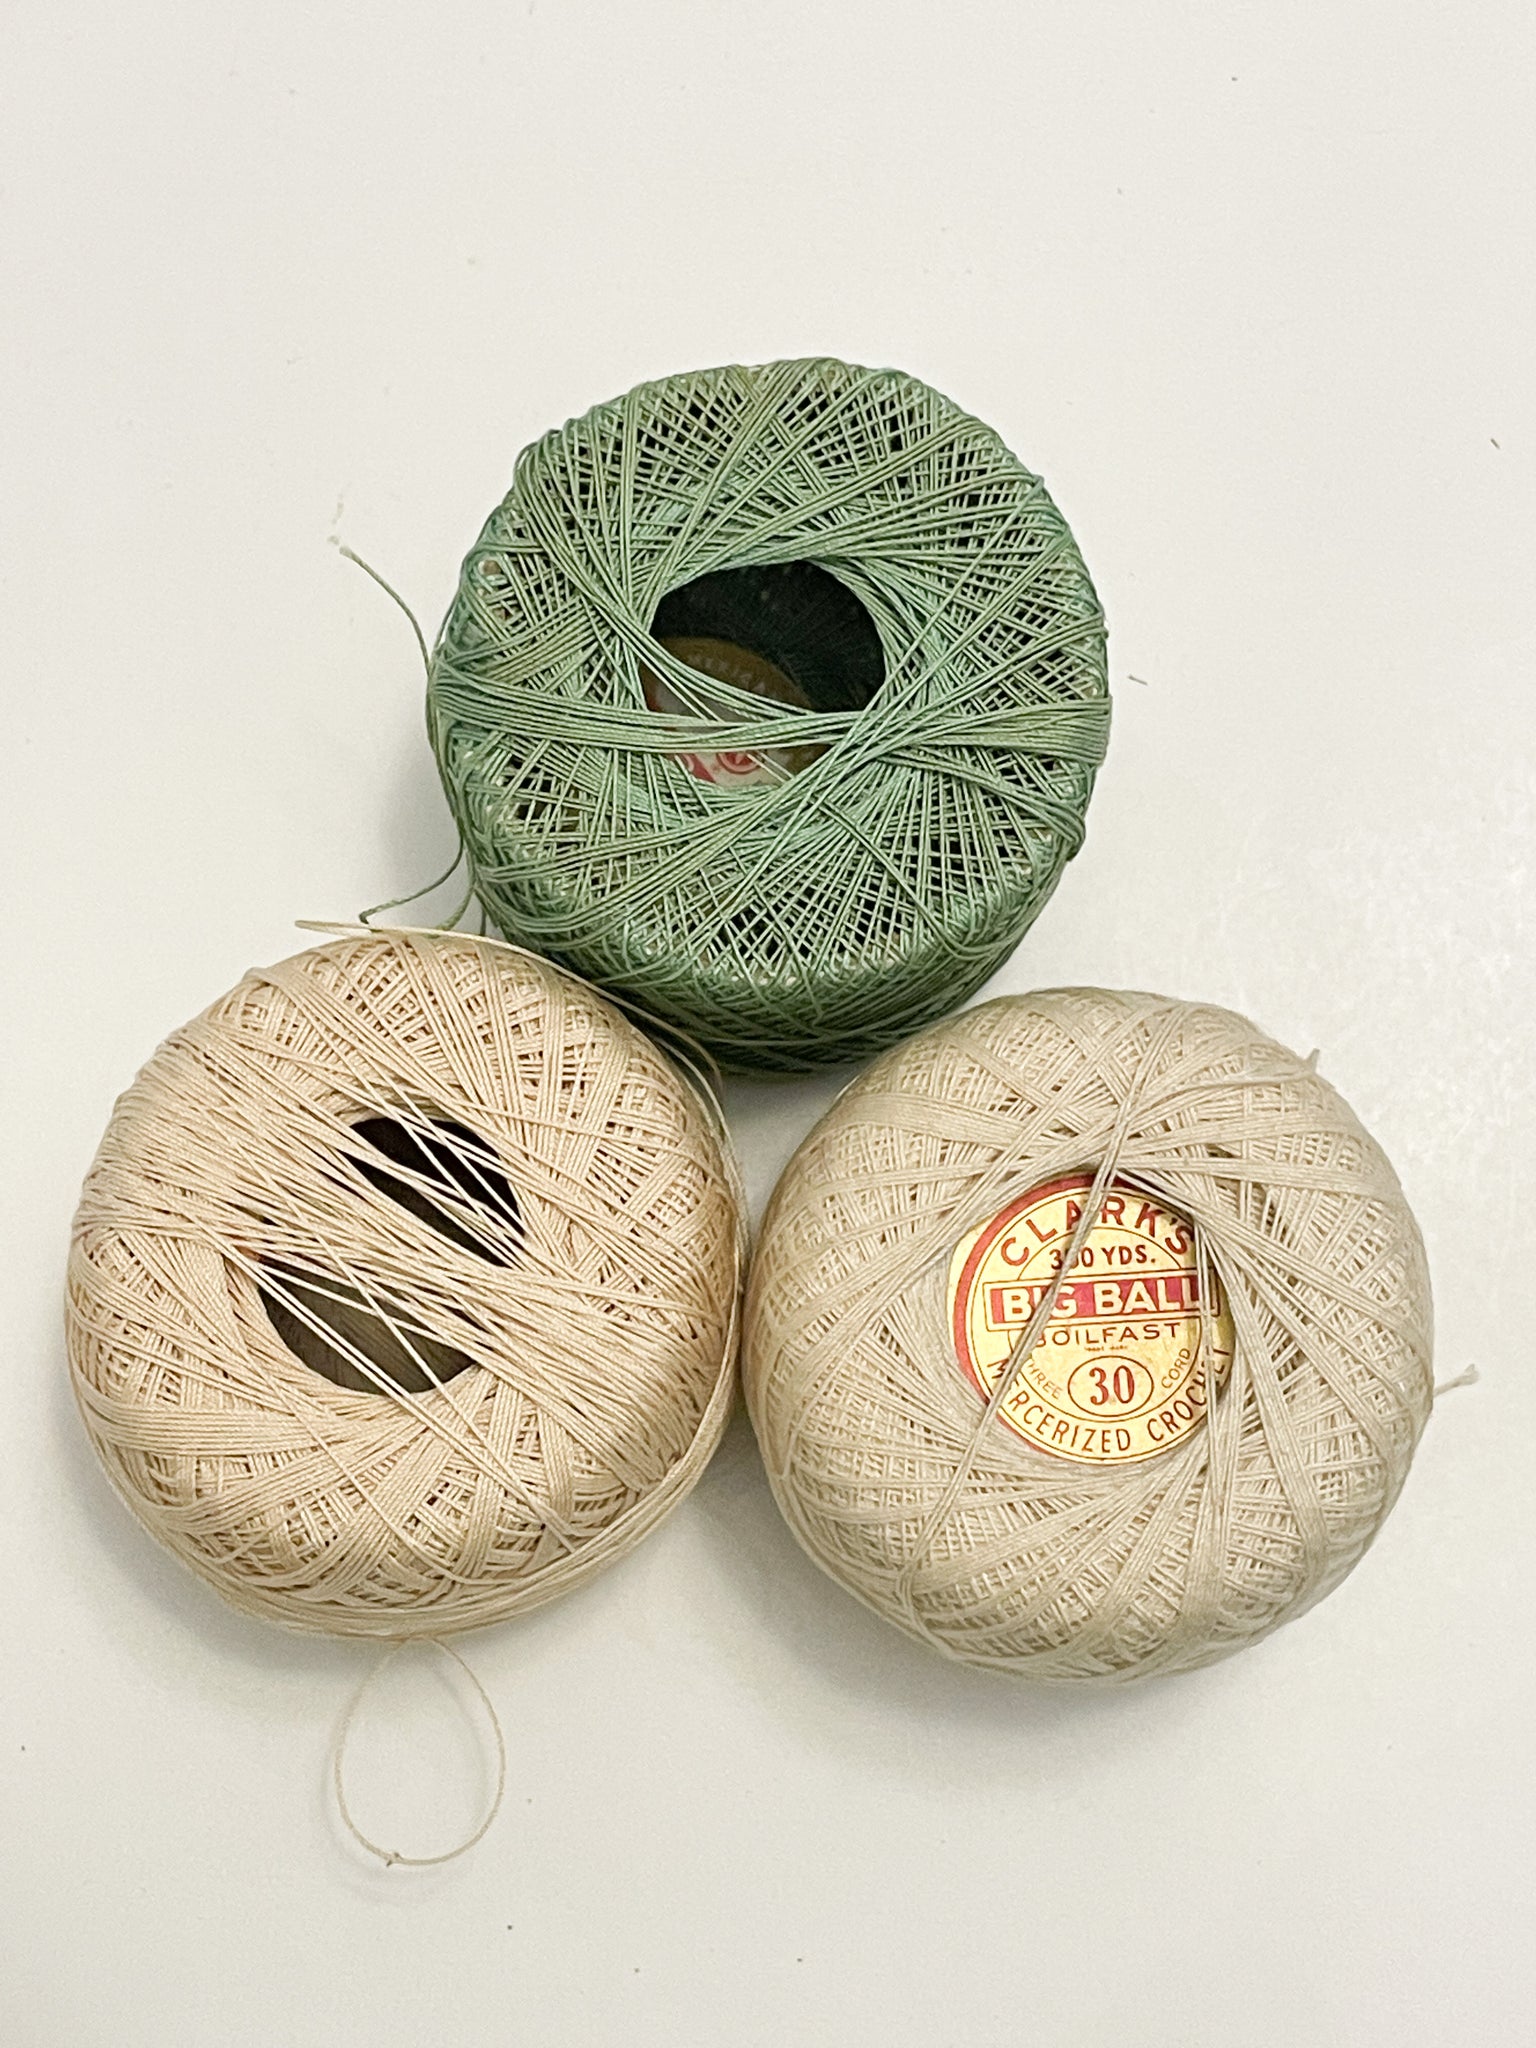 Crochet Thread Bundle Vintage Cotton - Green and Off Whites